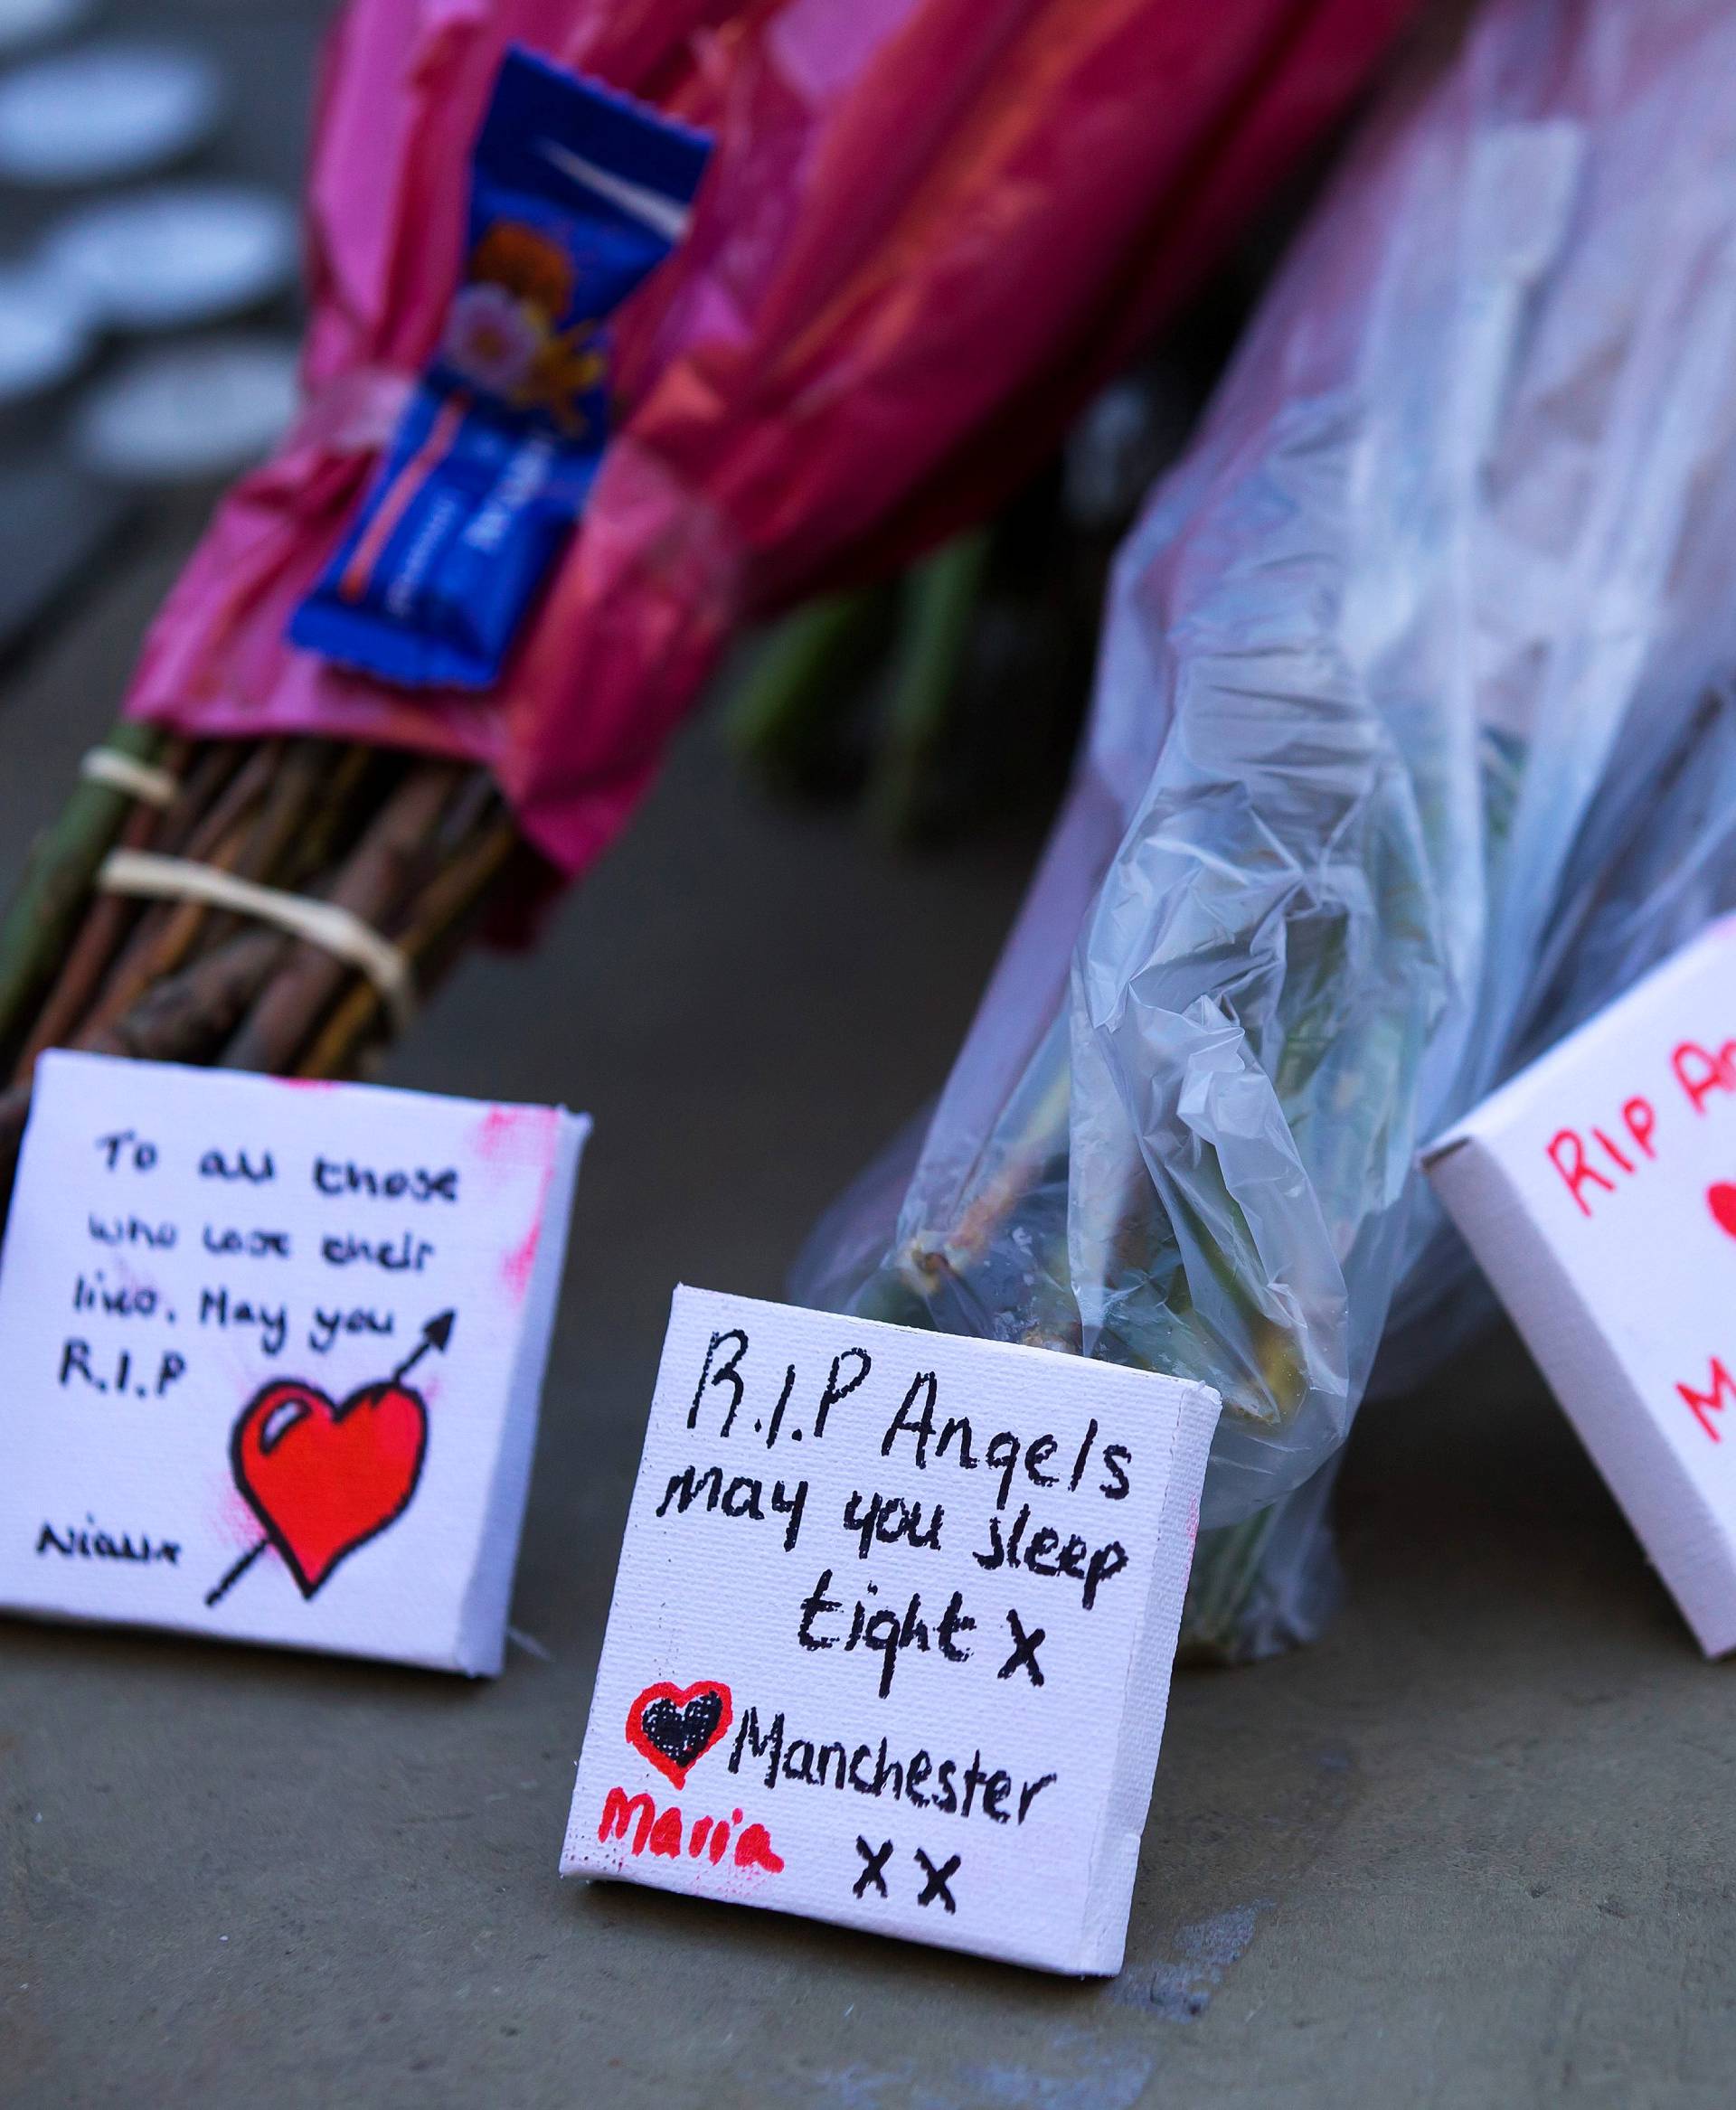 Flowers and messages of condolence are left for the victims of the Manchester Arena attack in central Manchester